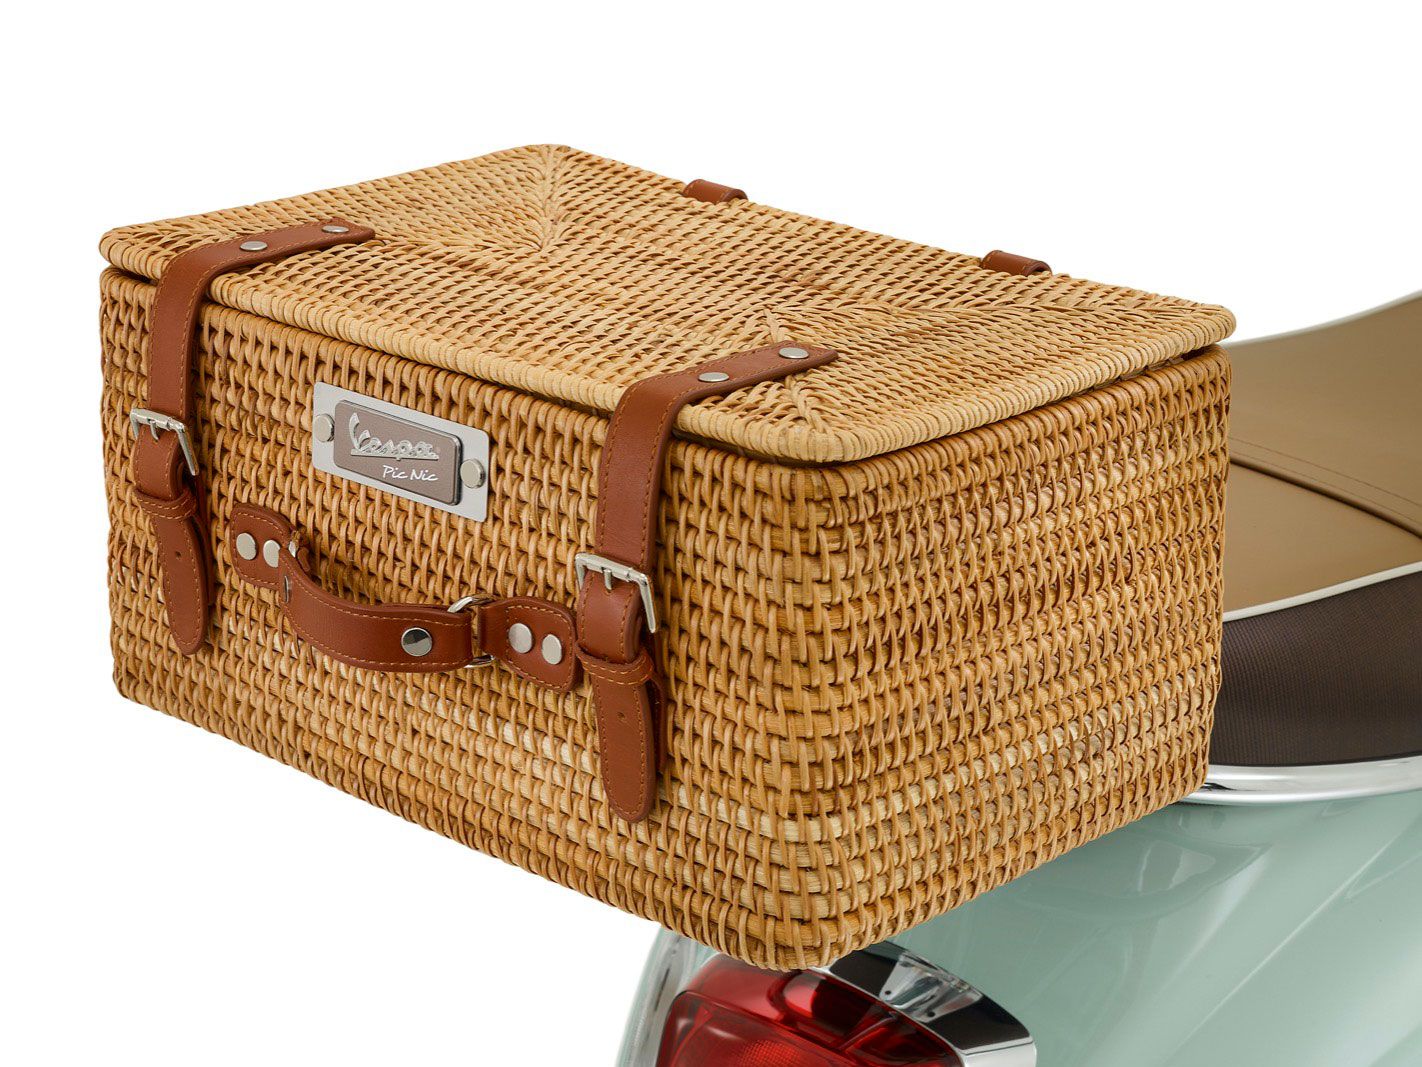 If the invite says BYOB (Bring Your Own Basket), the Pic Nic has you covered with a standard-equipment woven picnic basket.